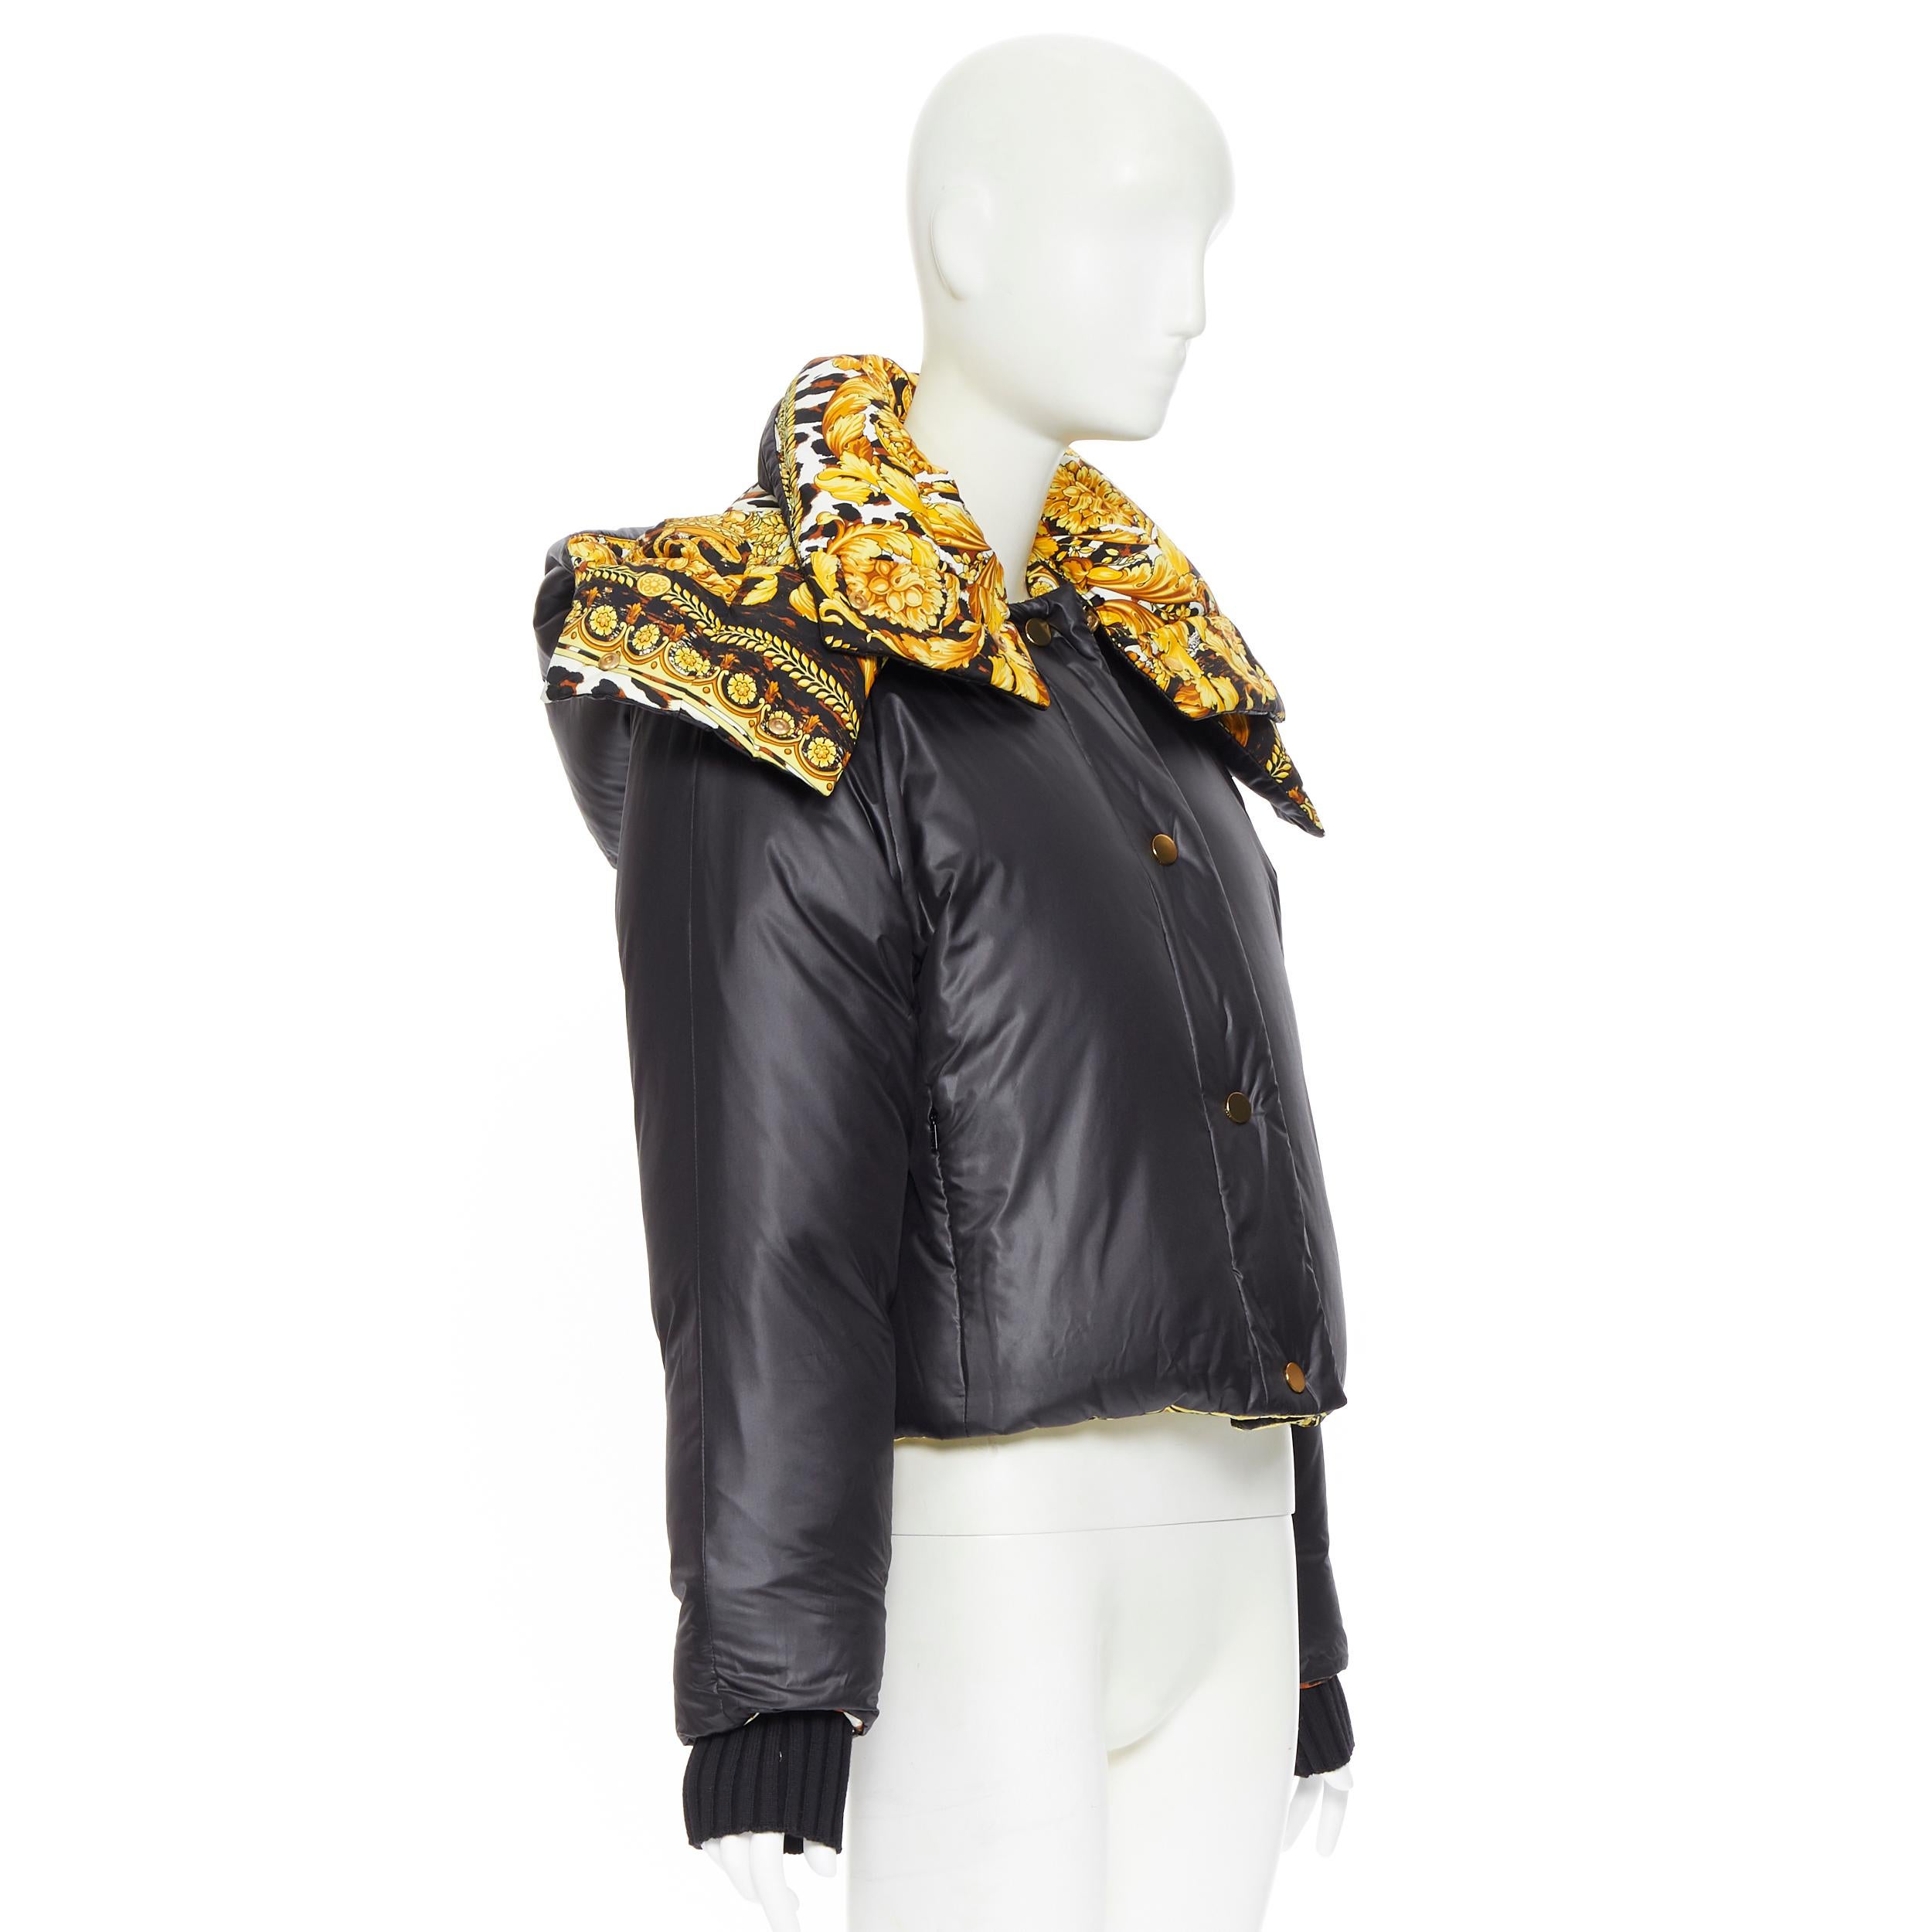 new VERSACE Reversible Wild Baroque leopard gold goose down padded jacket IT42 M
Brand: Versace
Designer: Donatella Versace
Collection: 2019
Model Name / Style: Wild baroque down jacket
Material: Nylon
Color: Gold
Pattern: Animal print
Closure: